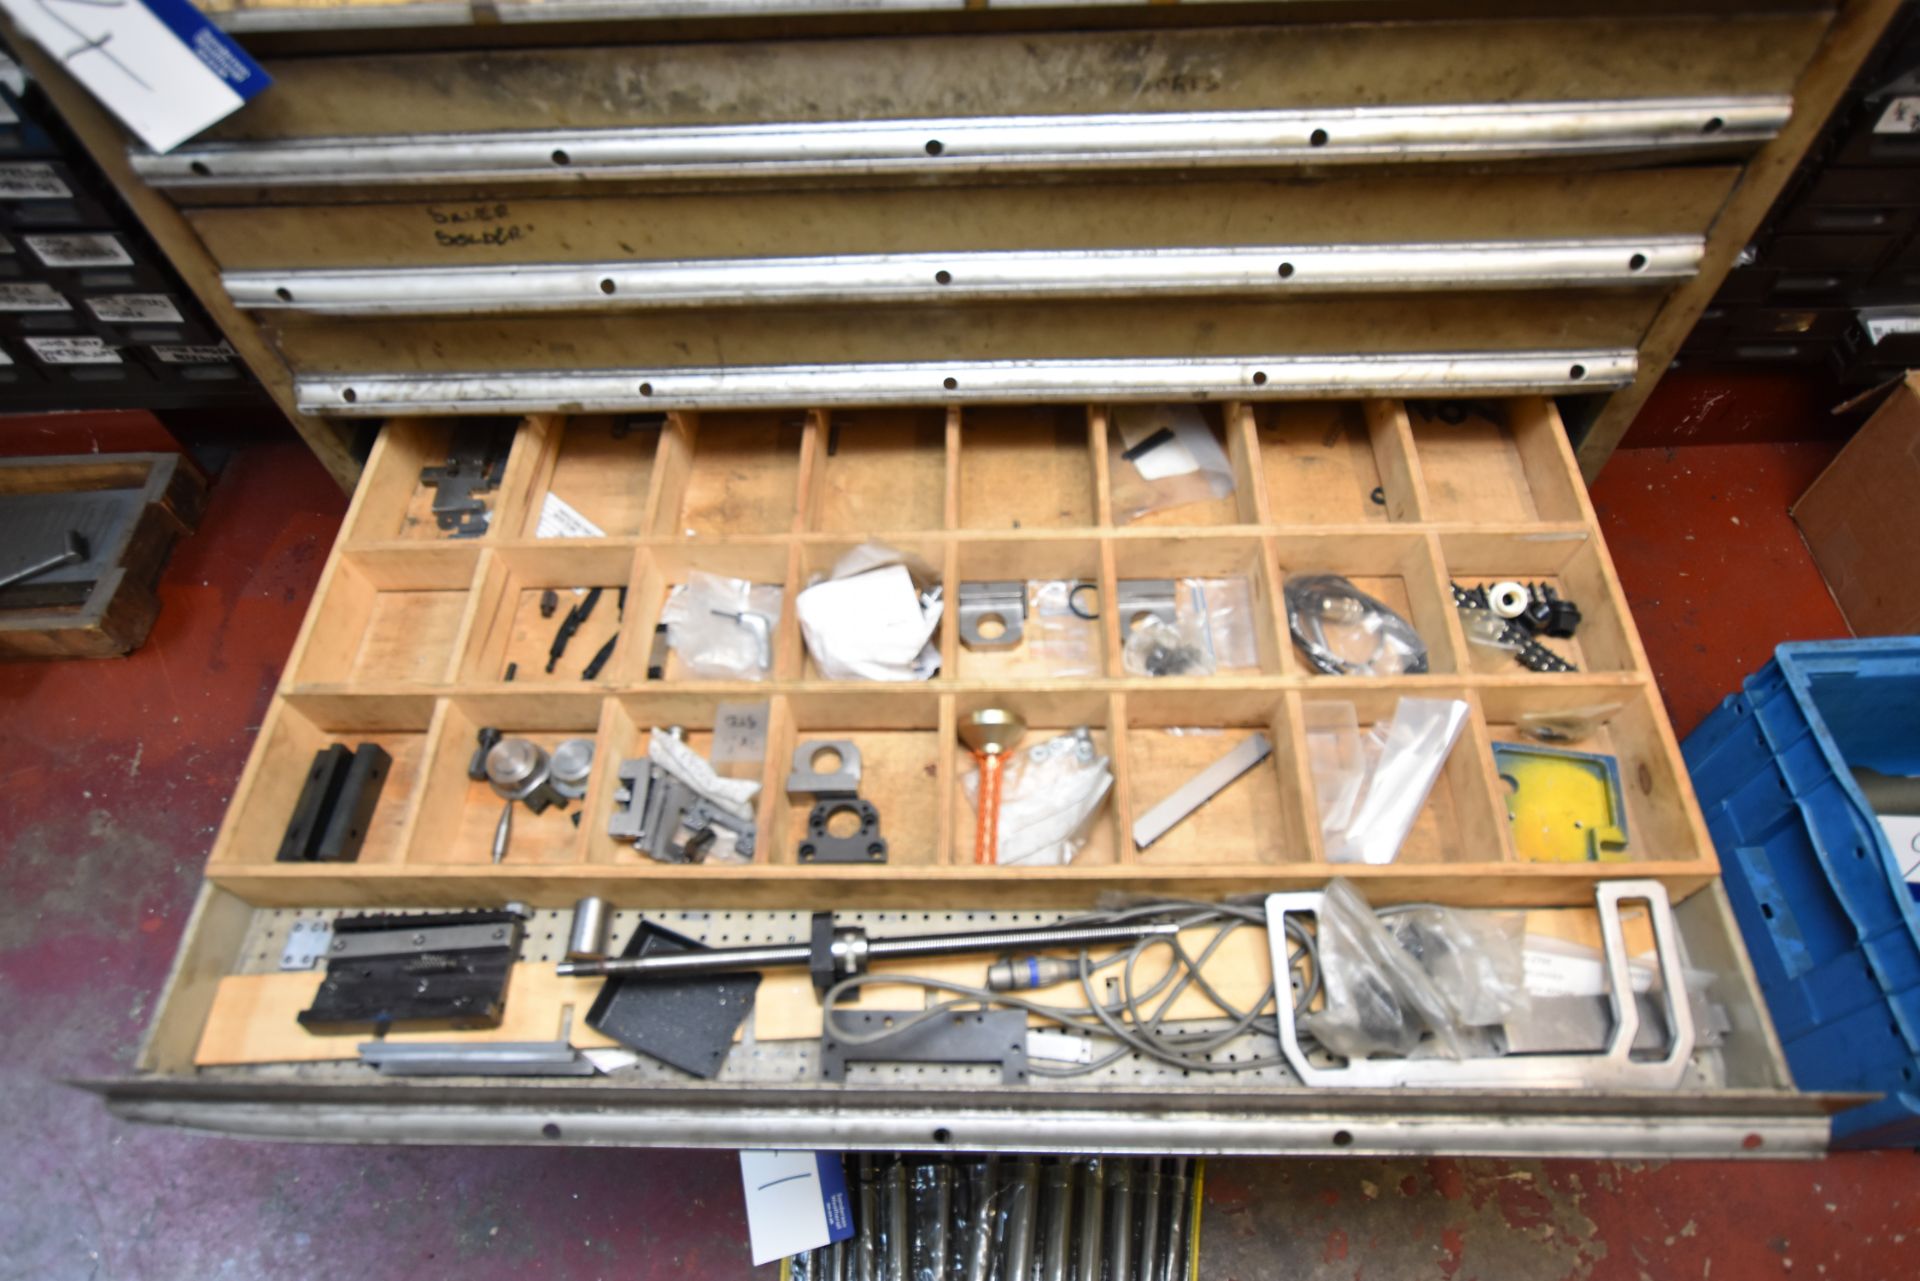 Contents to 4 Roller Drawers including Machine Par - Image 2 of 3